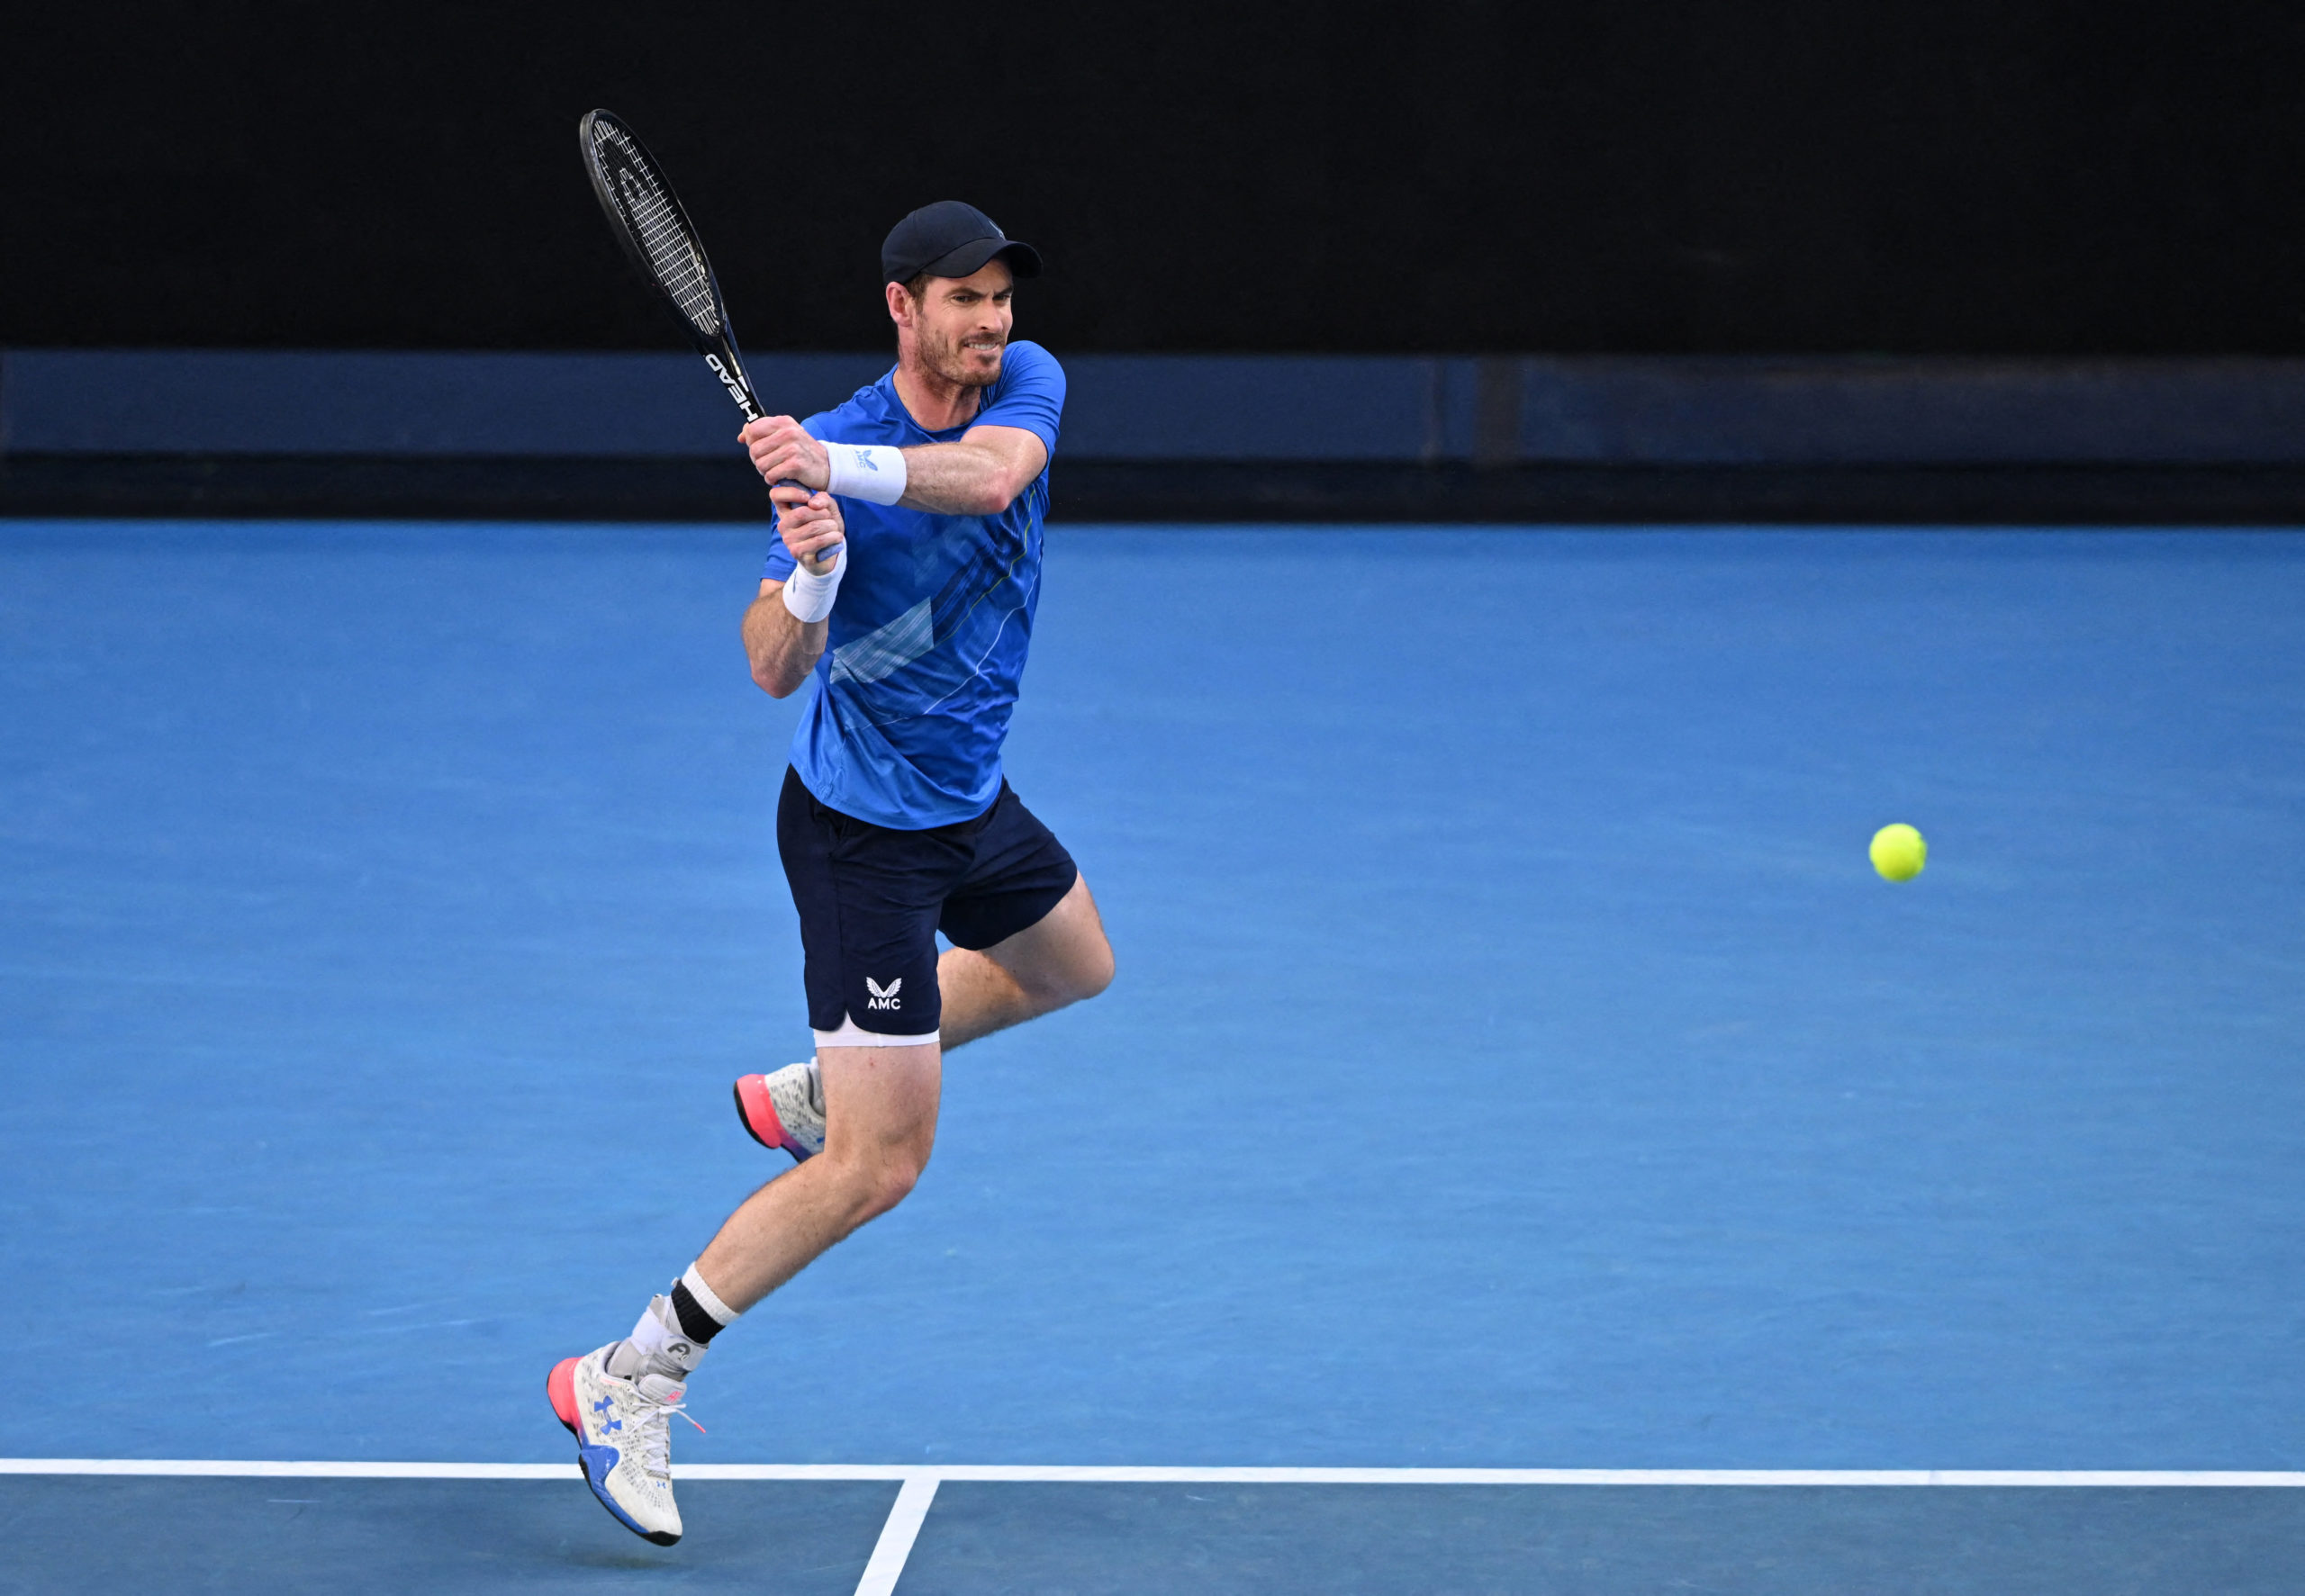 Tennis - Australian Open - Melbourne Park, Melbourne, Australia - January 20, 2022 Britain's Andy Murray in action during his second round match against Japan's Taro Daniel 